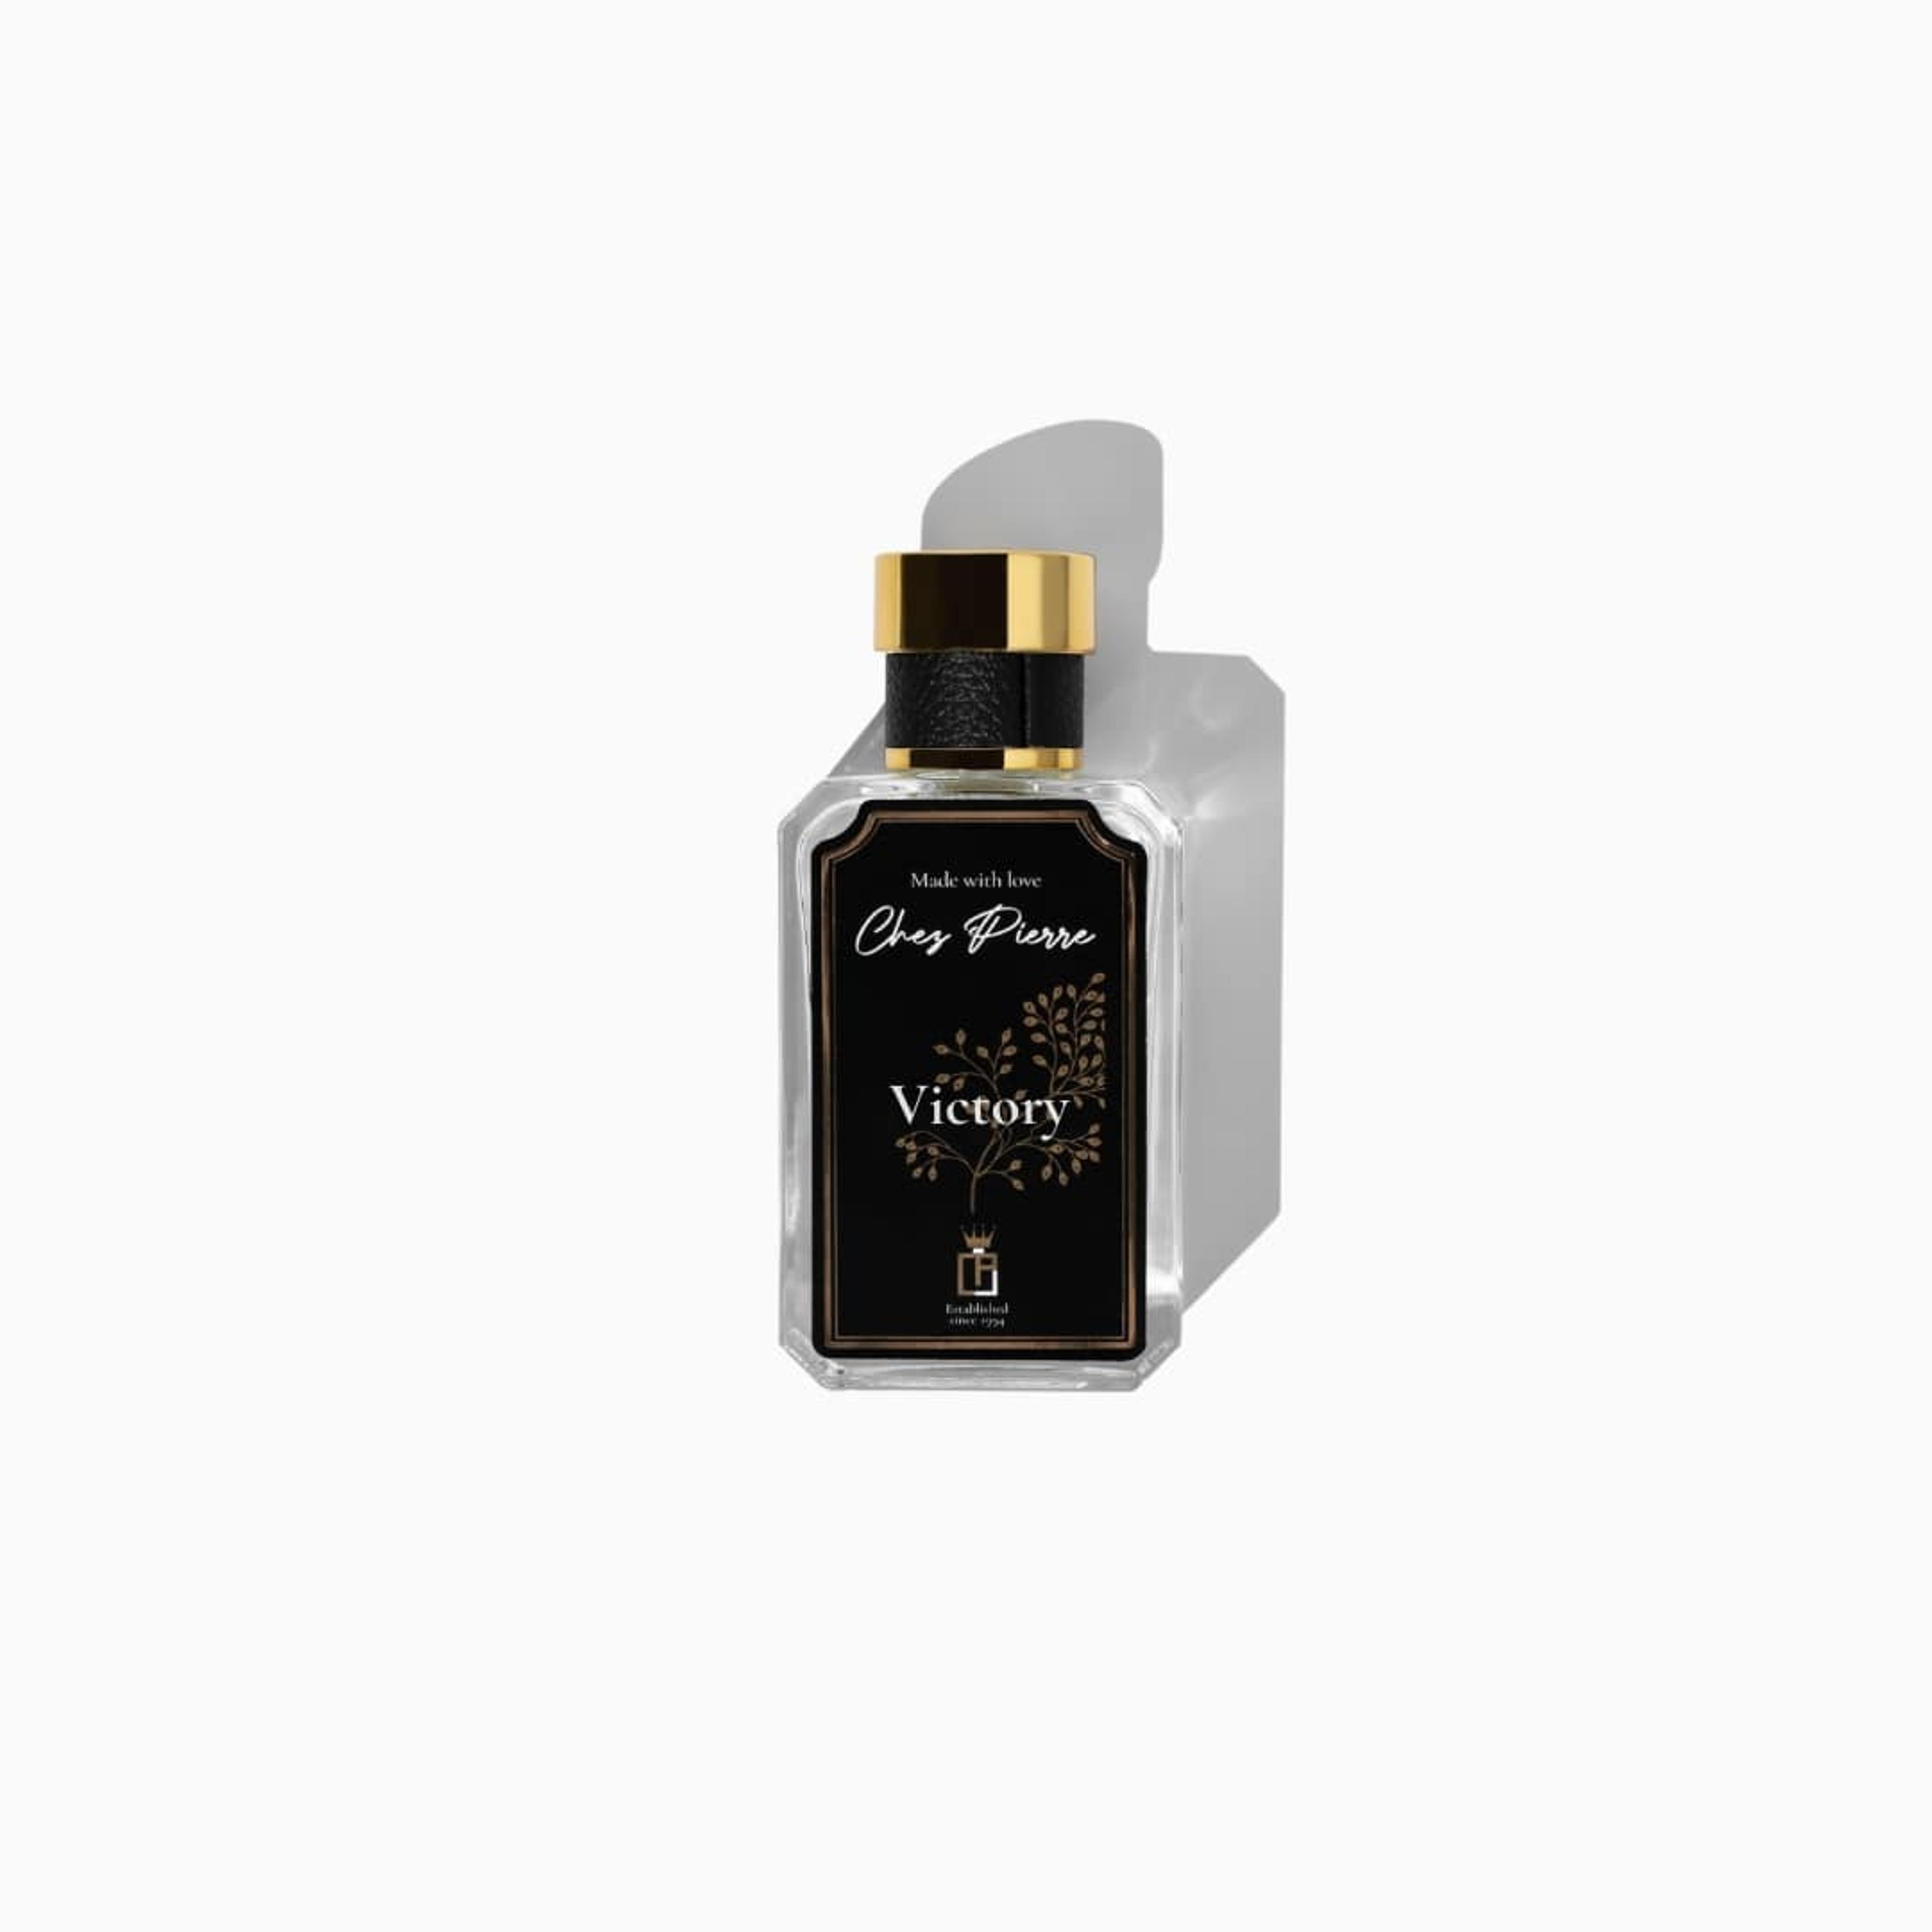 Chez Pierre's Victory Perfume Inspired By Black Code